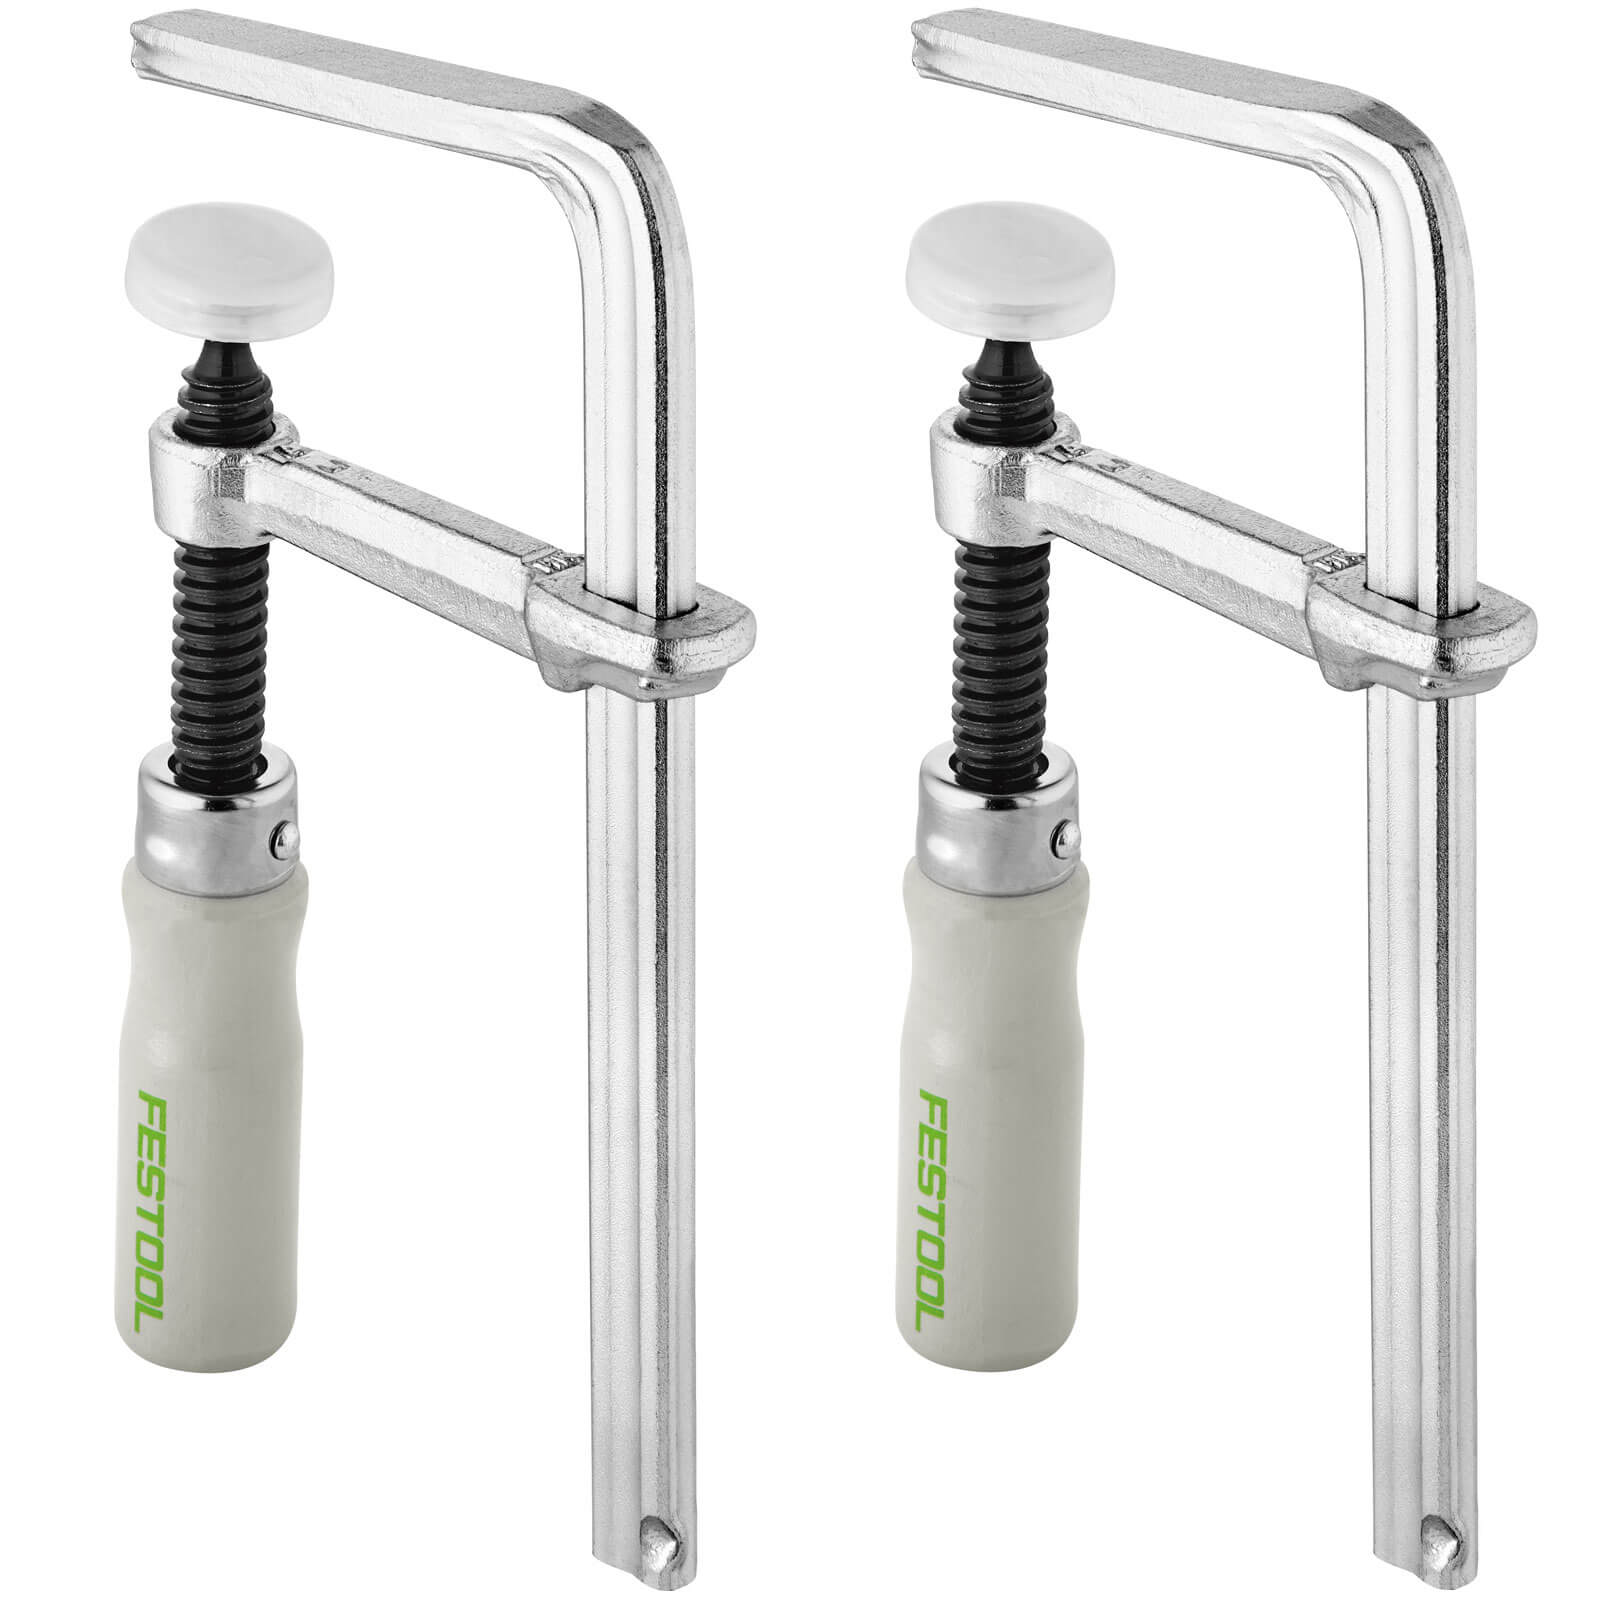 Image of Festool FSZ 120 Guide Rail Clamps Pack of 2